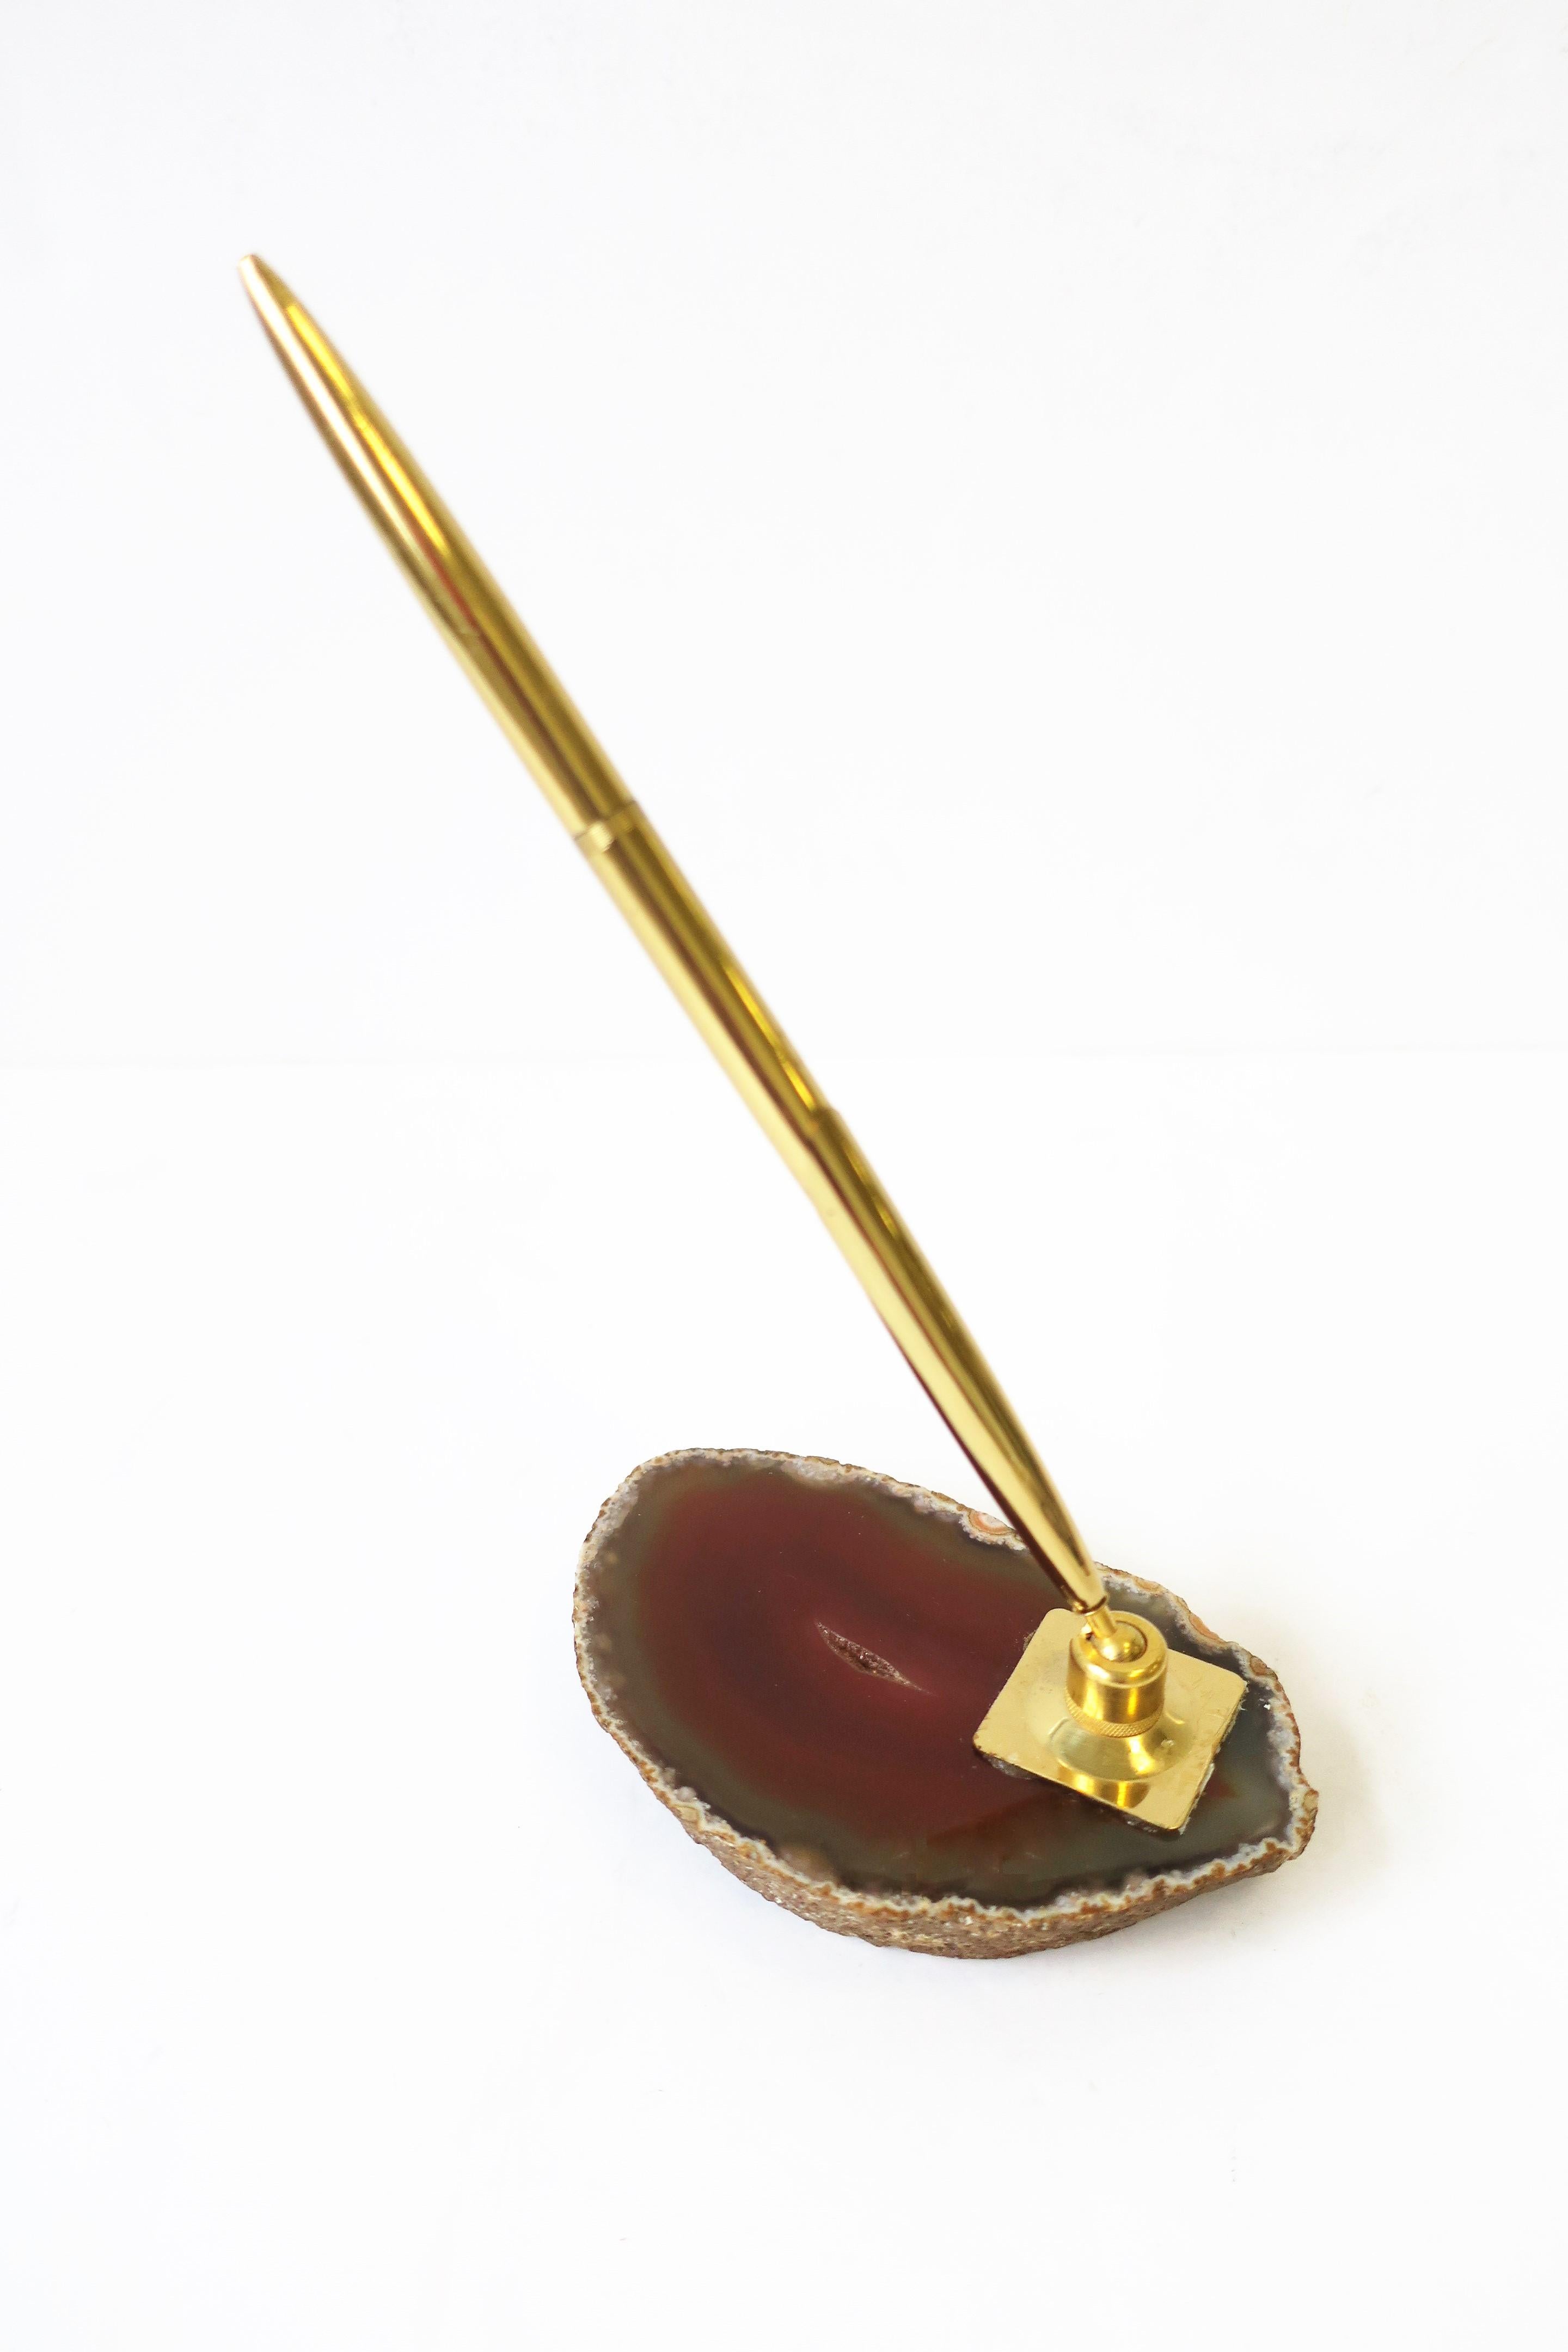 A '70s modern brass and onyx/agate desk pen holder. Onyx/agate is a red burgundy hue. Pen is in fine working order. 

Picture frame and brass tape dispenser shown in images have sold. 